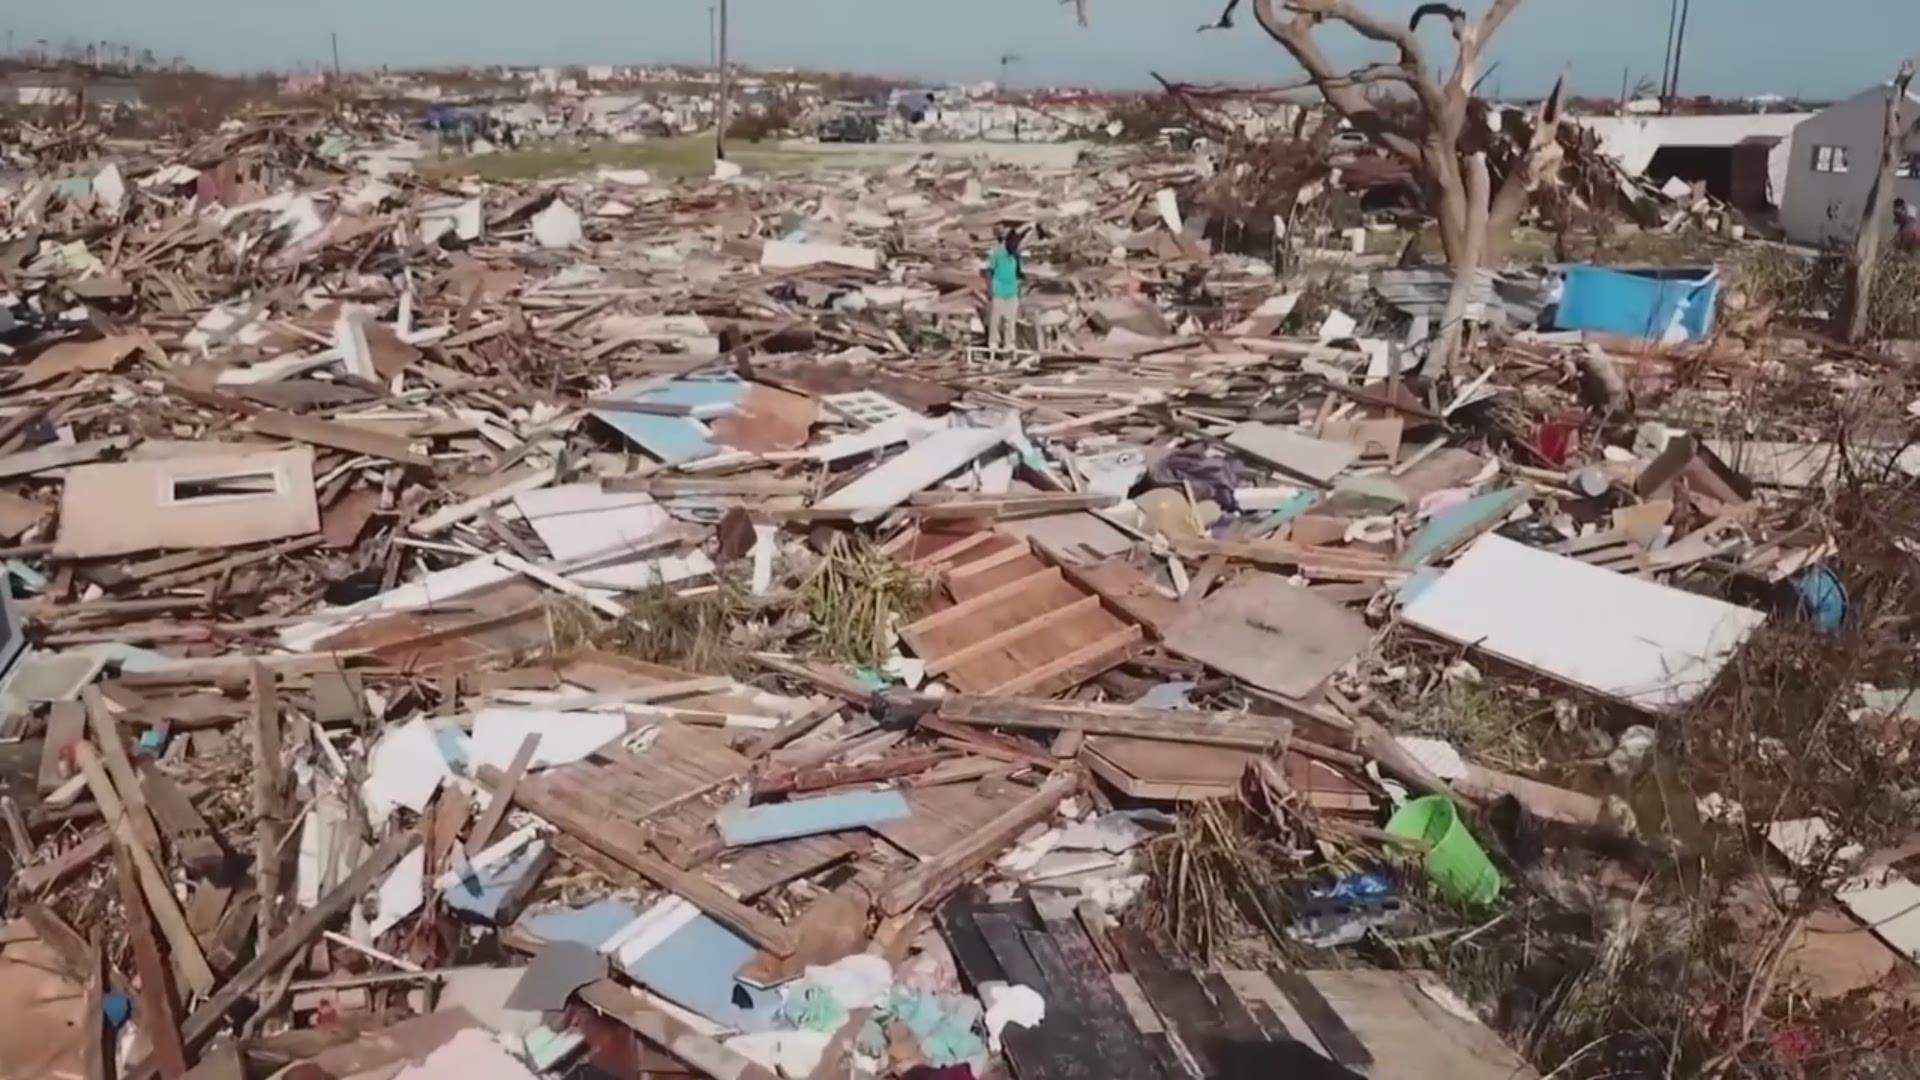 A drone flew over Bahamas shows the damage from Hurricane Dorian. A United Nations relief official says some 70,000 people on the islands of Abaco and Grand Bahama are in need of lifesaving aid.